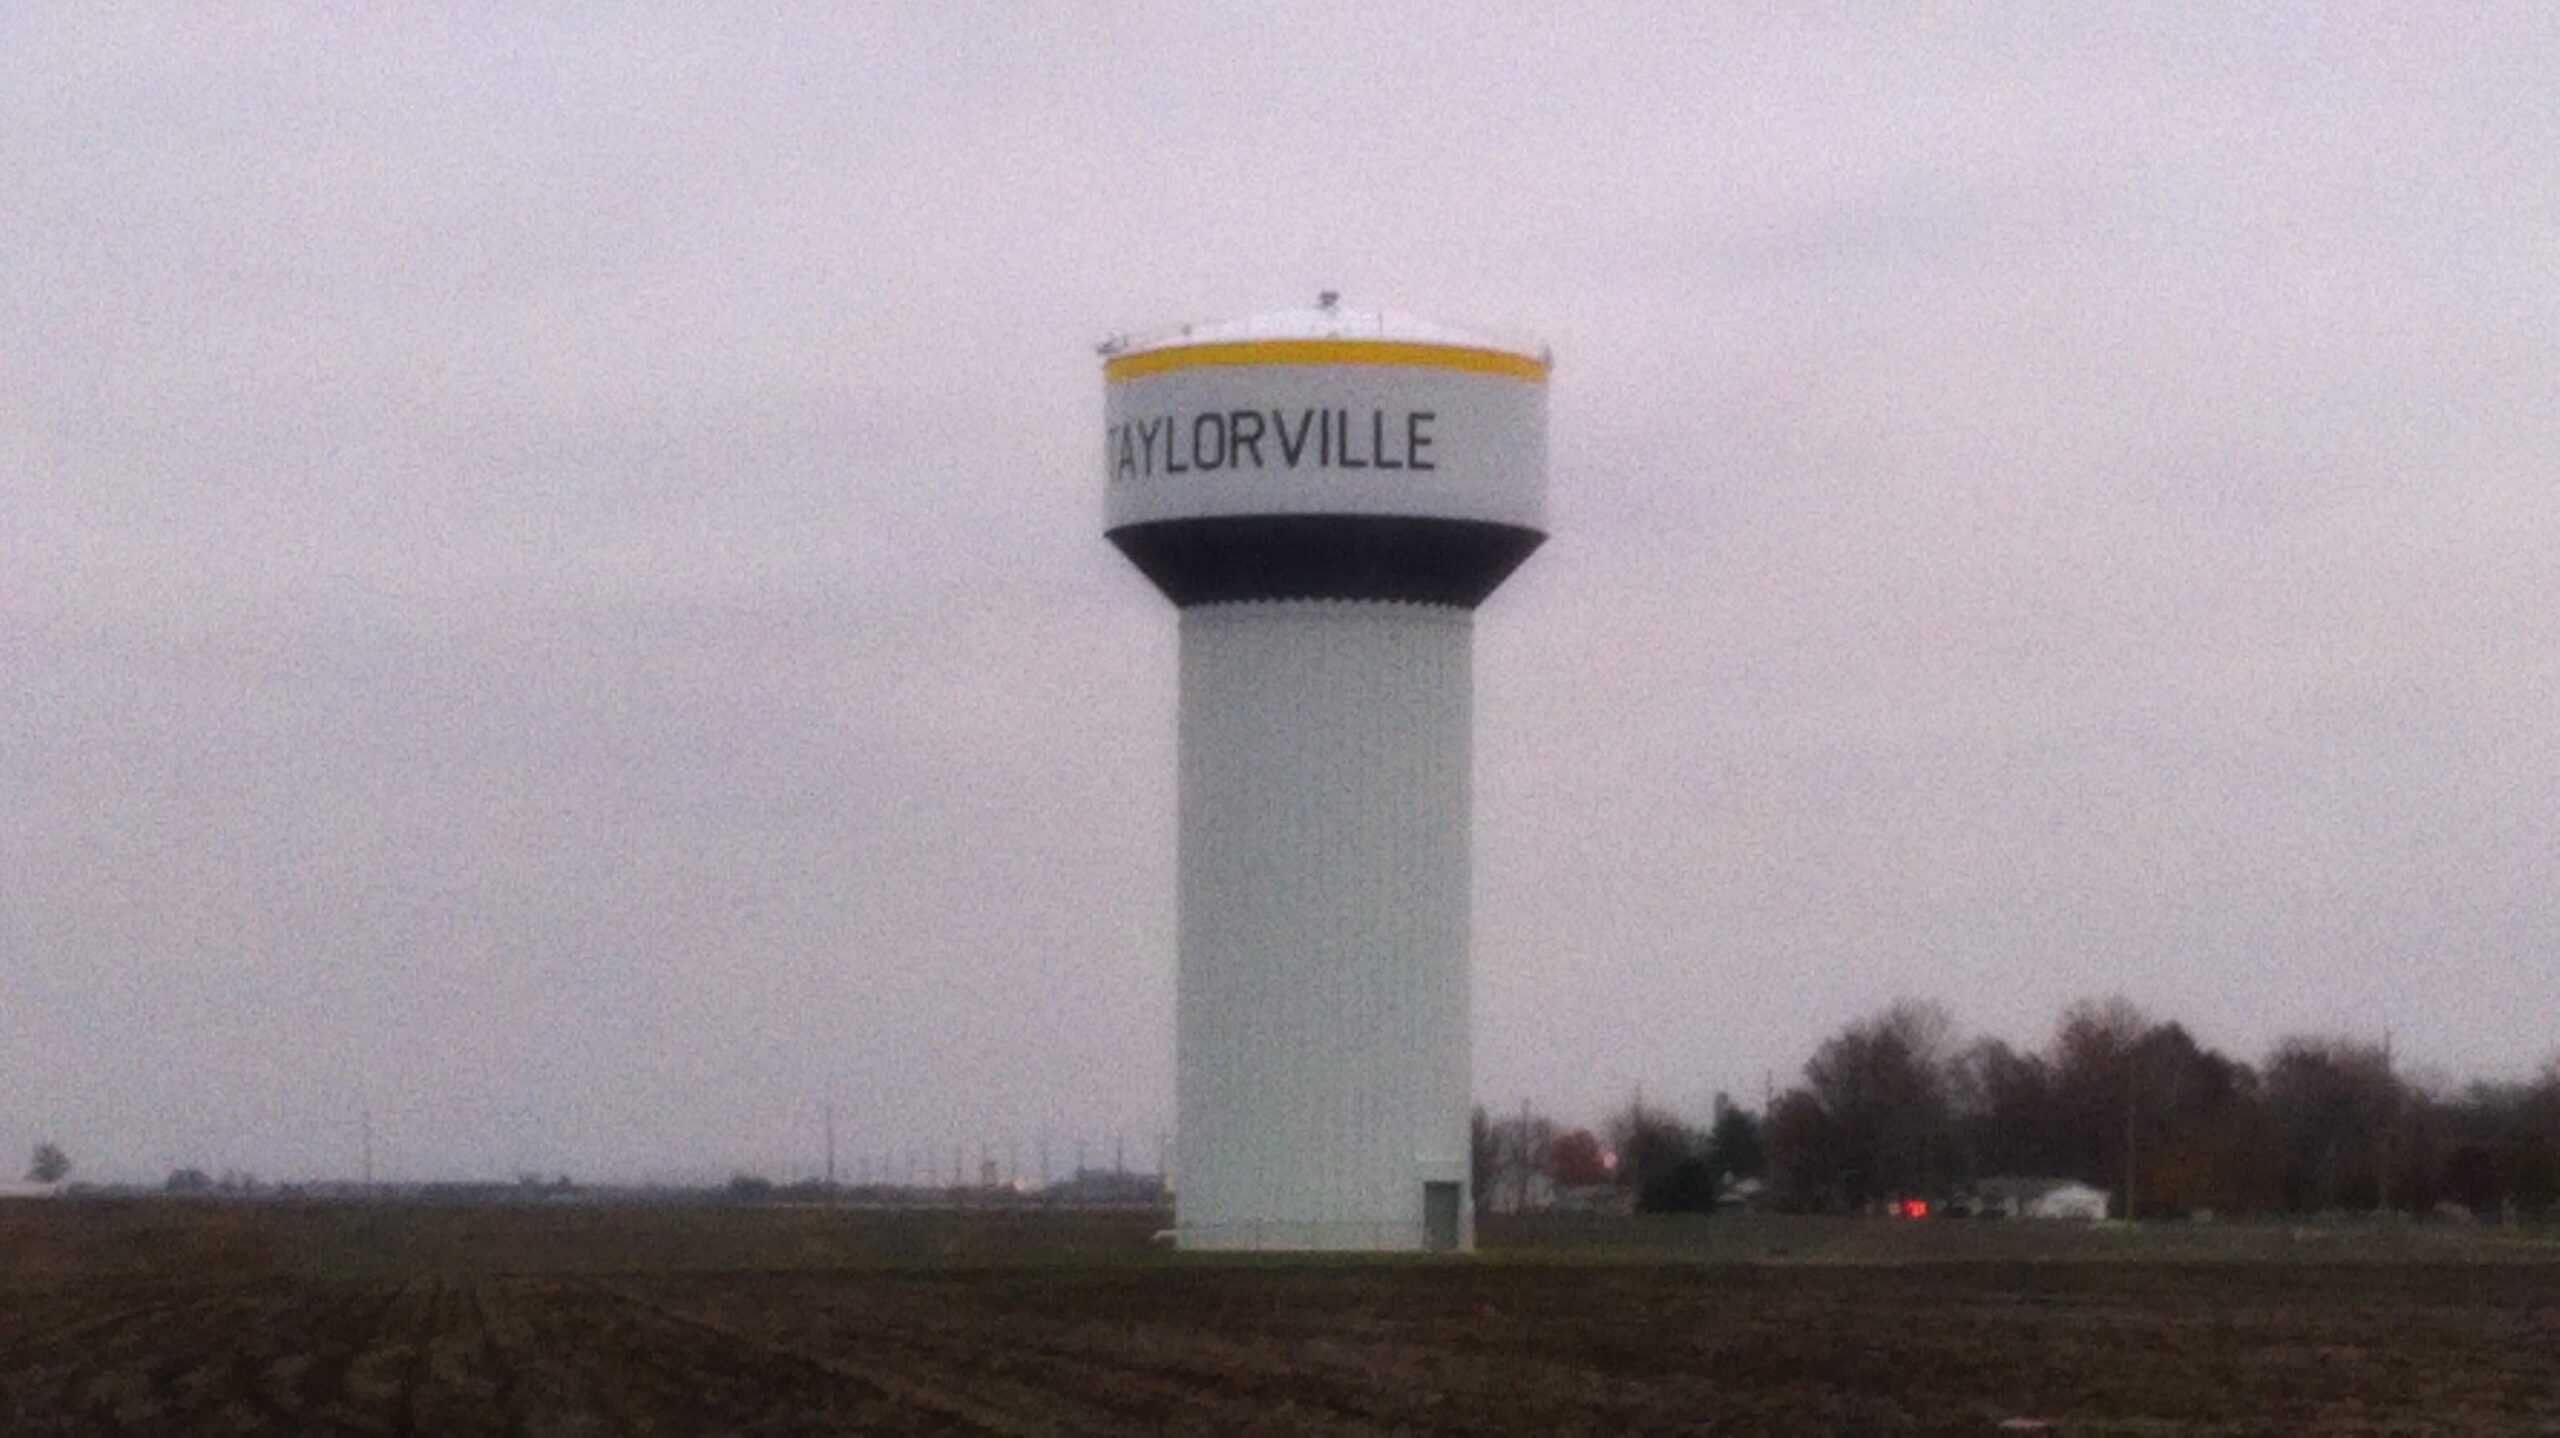 Taylorville Watertower by Dre Waters